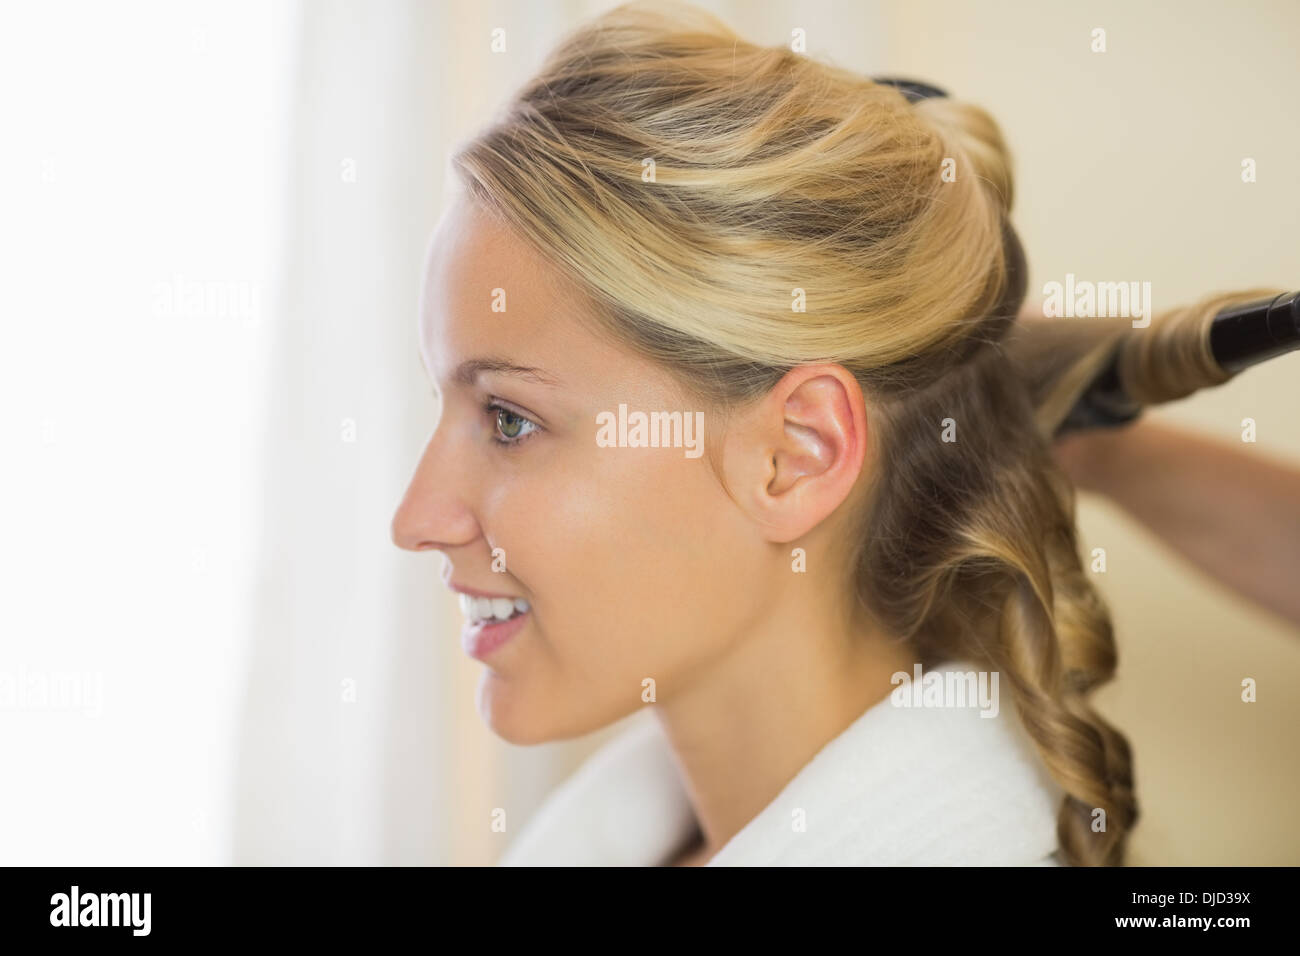 Blonde cute woman having her hair done Stock Photo